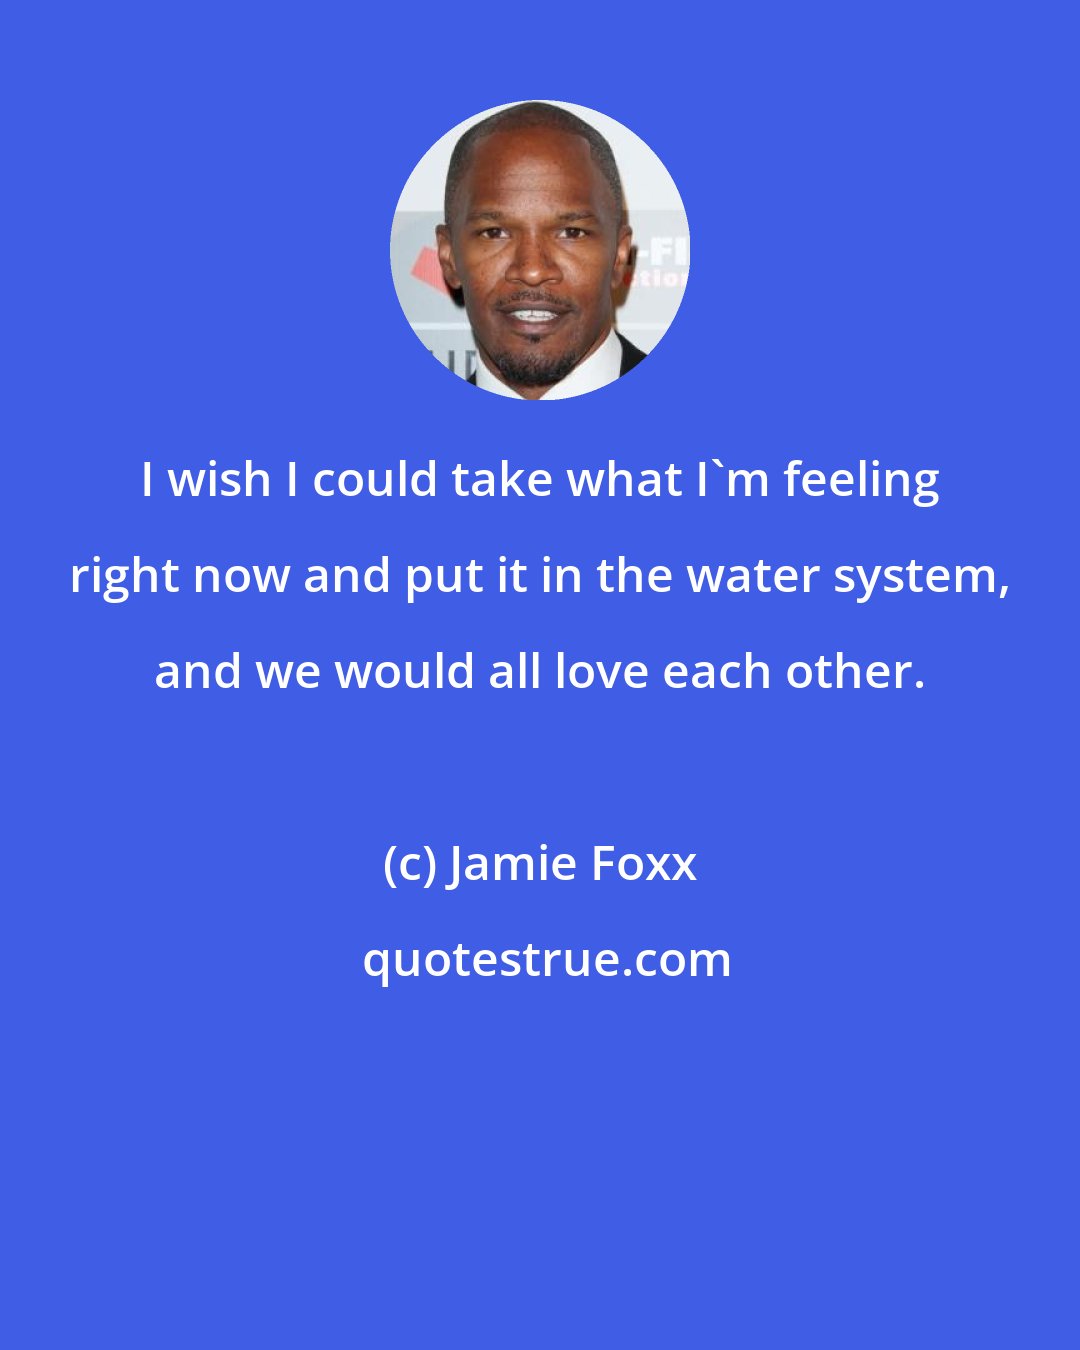 Jamie Foxx: I wish I could take what I'm feeling right now and put it in the water system, and we would all love each other.